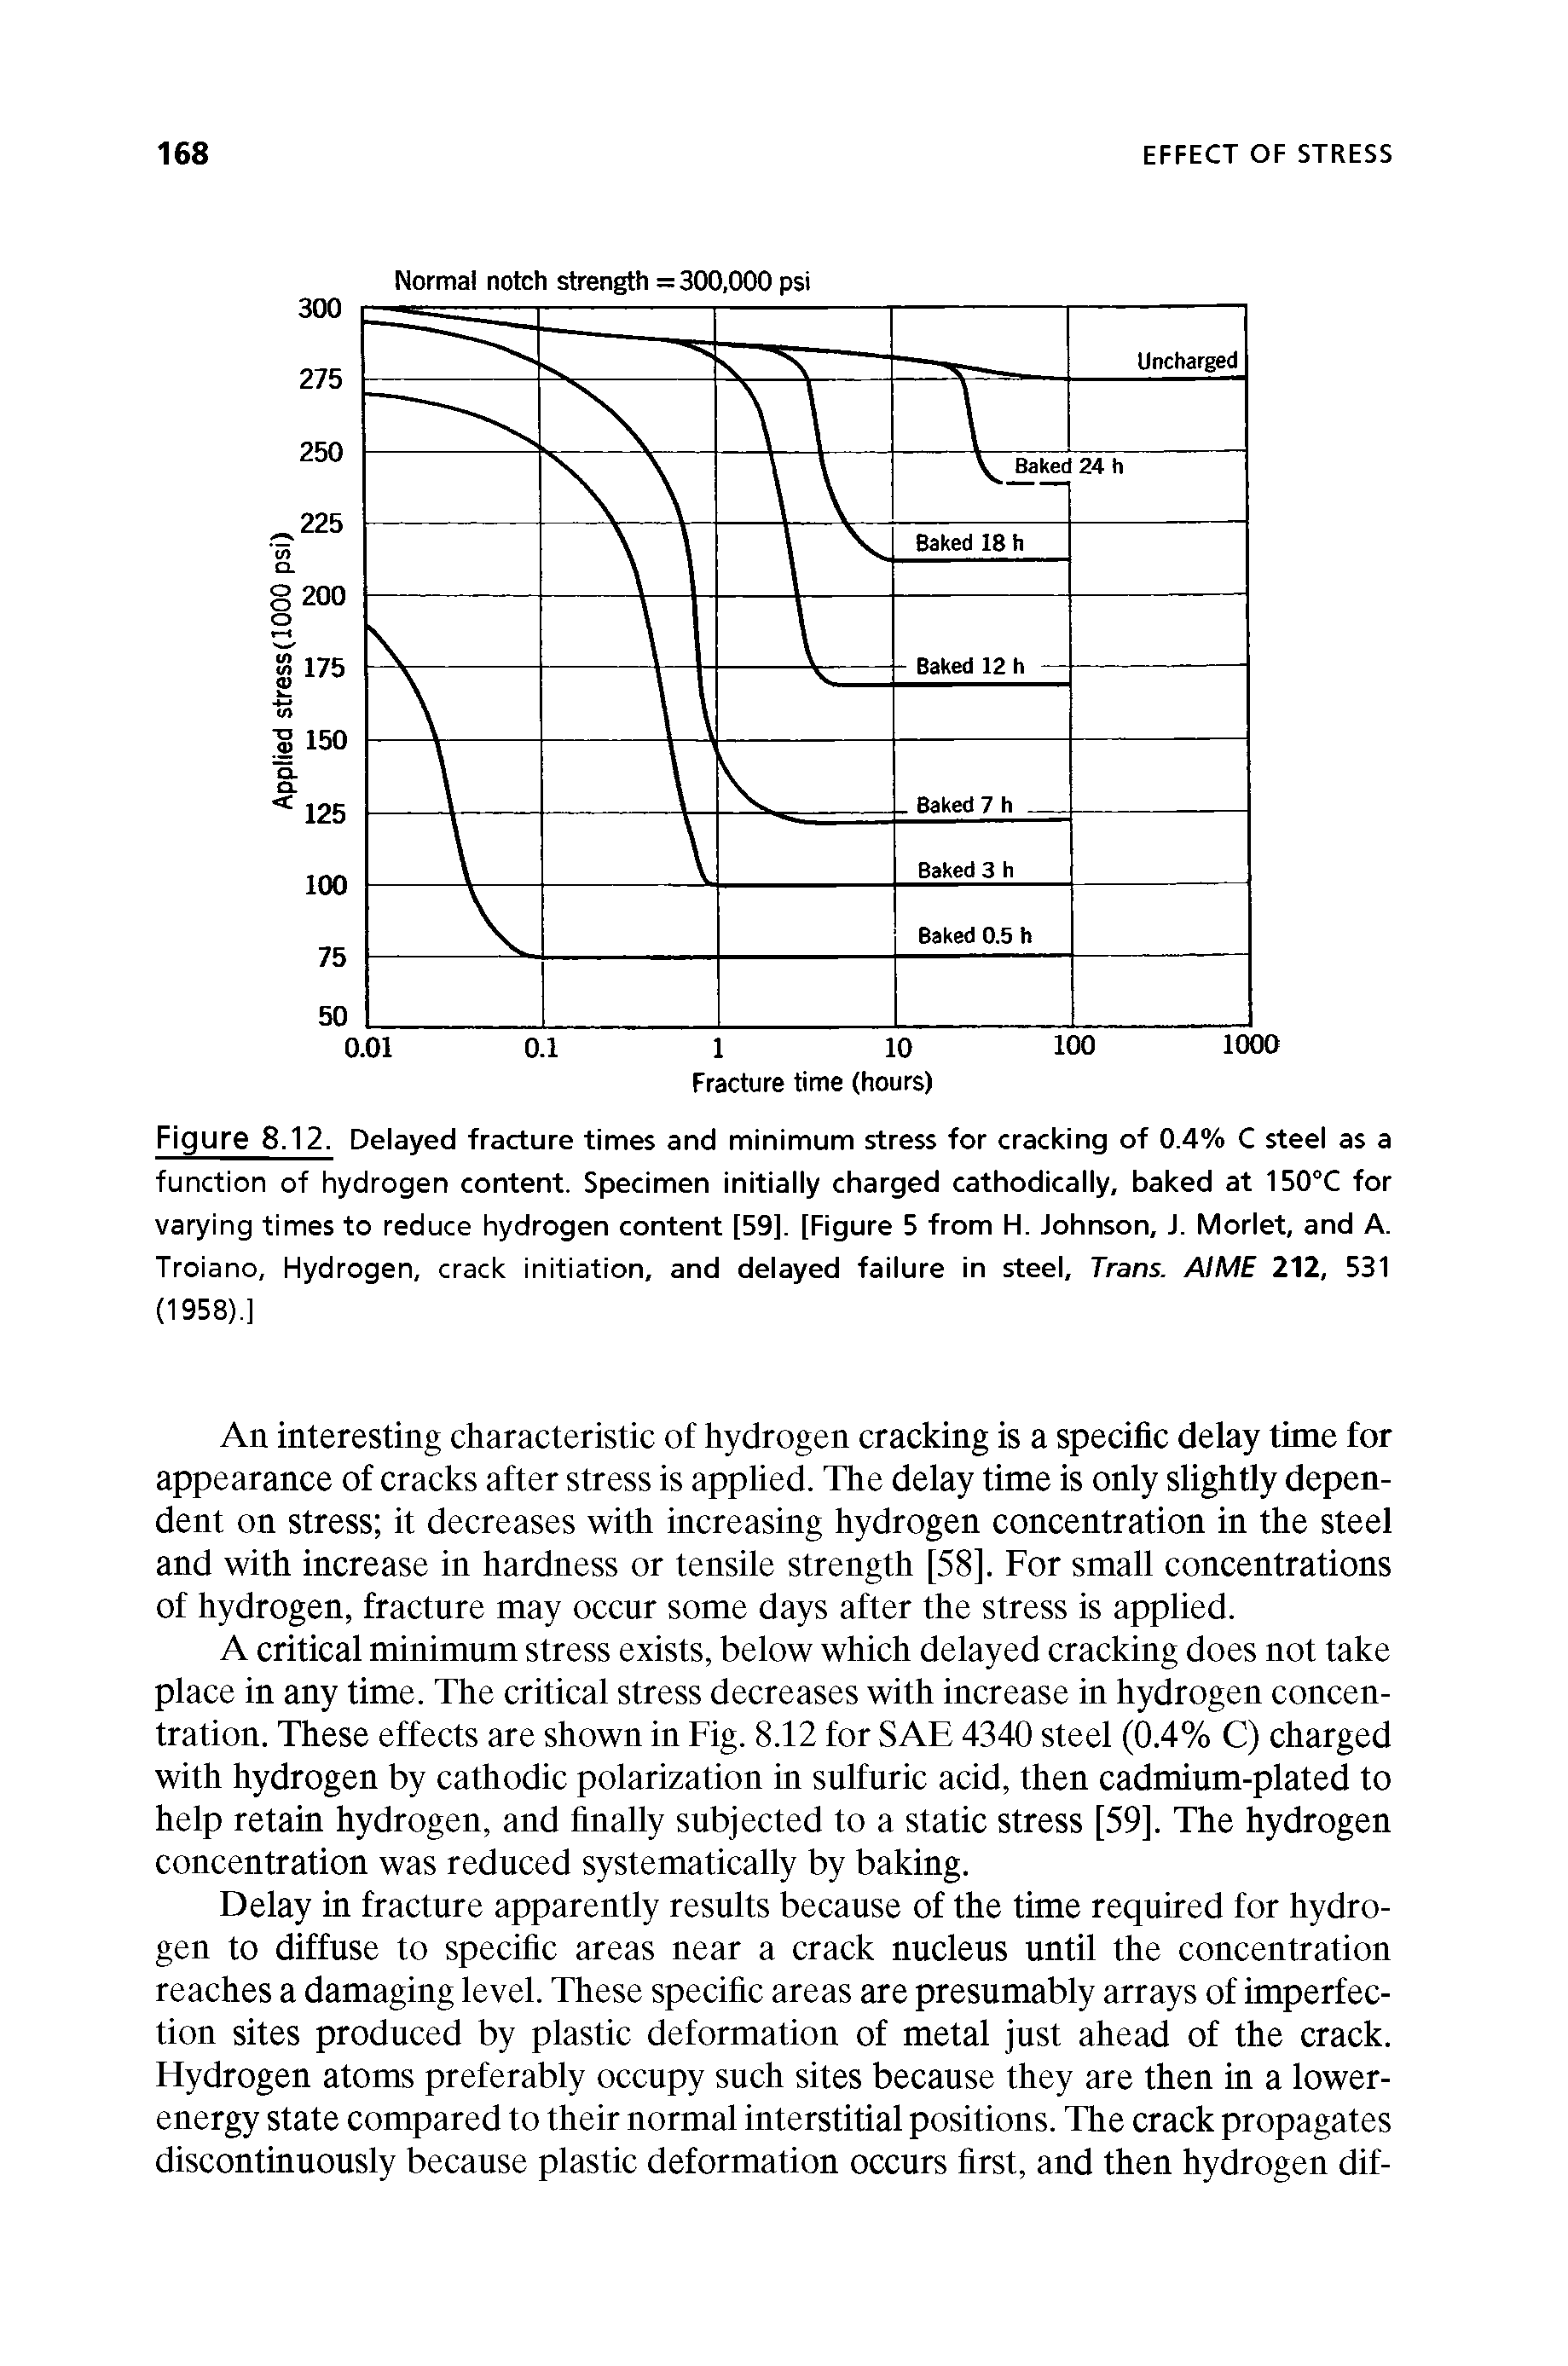 Figure 8.12. Delayed fracture times and minimum stress for cracking of 0.4% C steel as a function of hydrogen content. Specimen initially charged cathodically, baked at 150°C for varying times to reduce hydrogen content [59]. [Figure 5 from H. Johnson, J. Morlet, and A. Troiano, Hydrogen, crack initiation, and delayed failure in steel, Trans. AIME 212, 531 (1958).]...